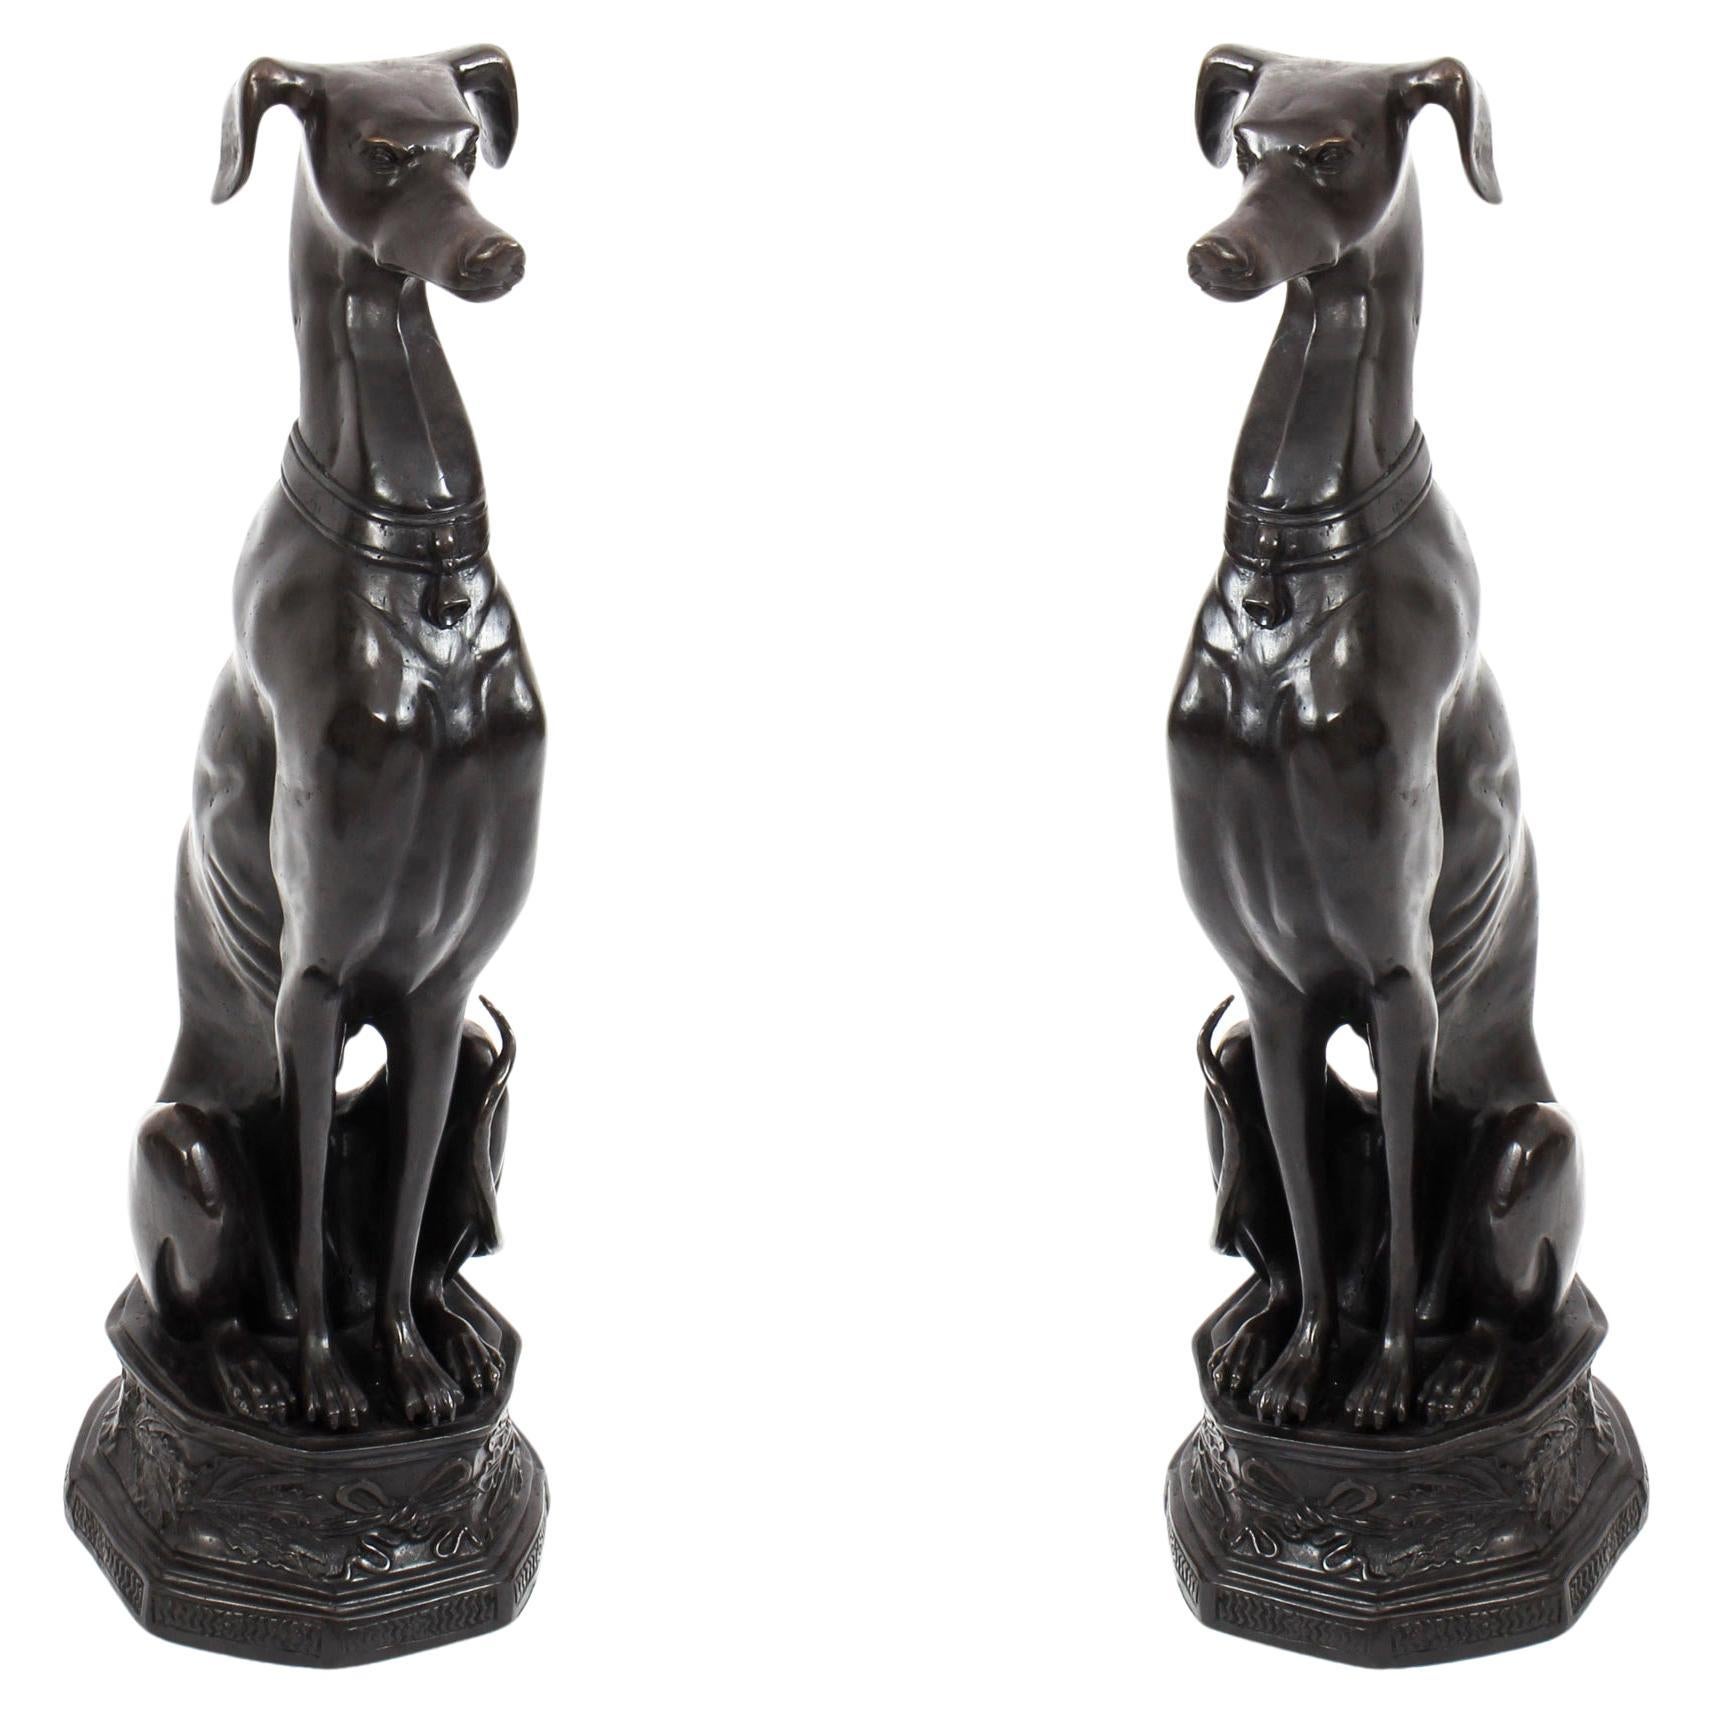 Vintage Pair of Large Art Deco Revival Bronze Seated Dogs 20th Century